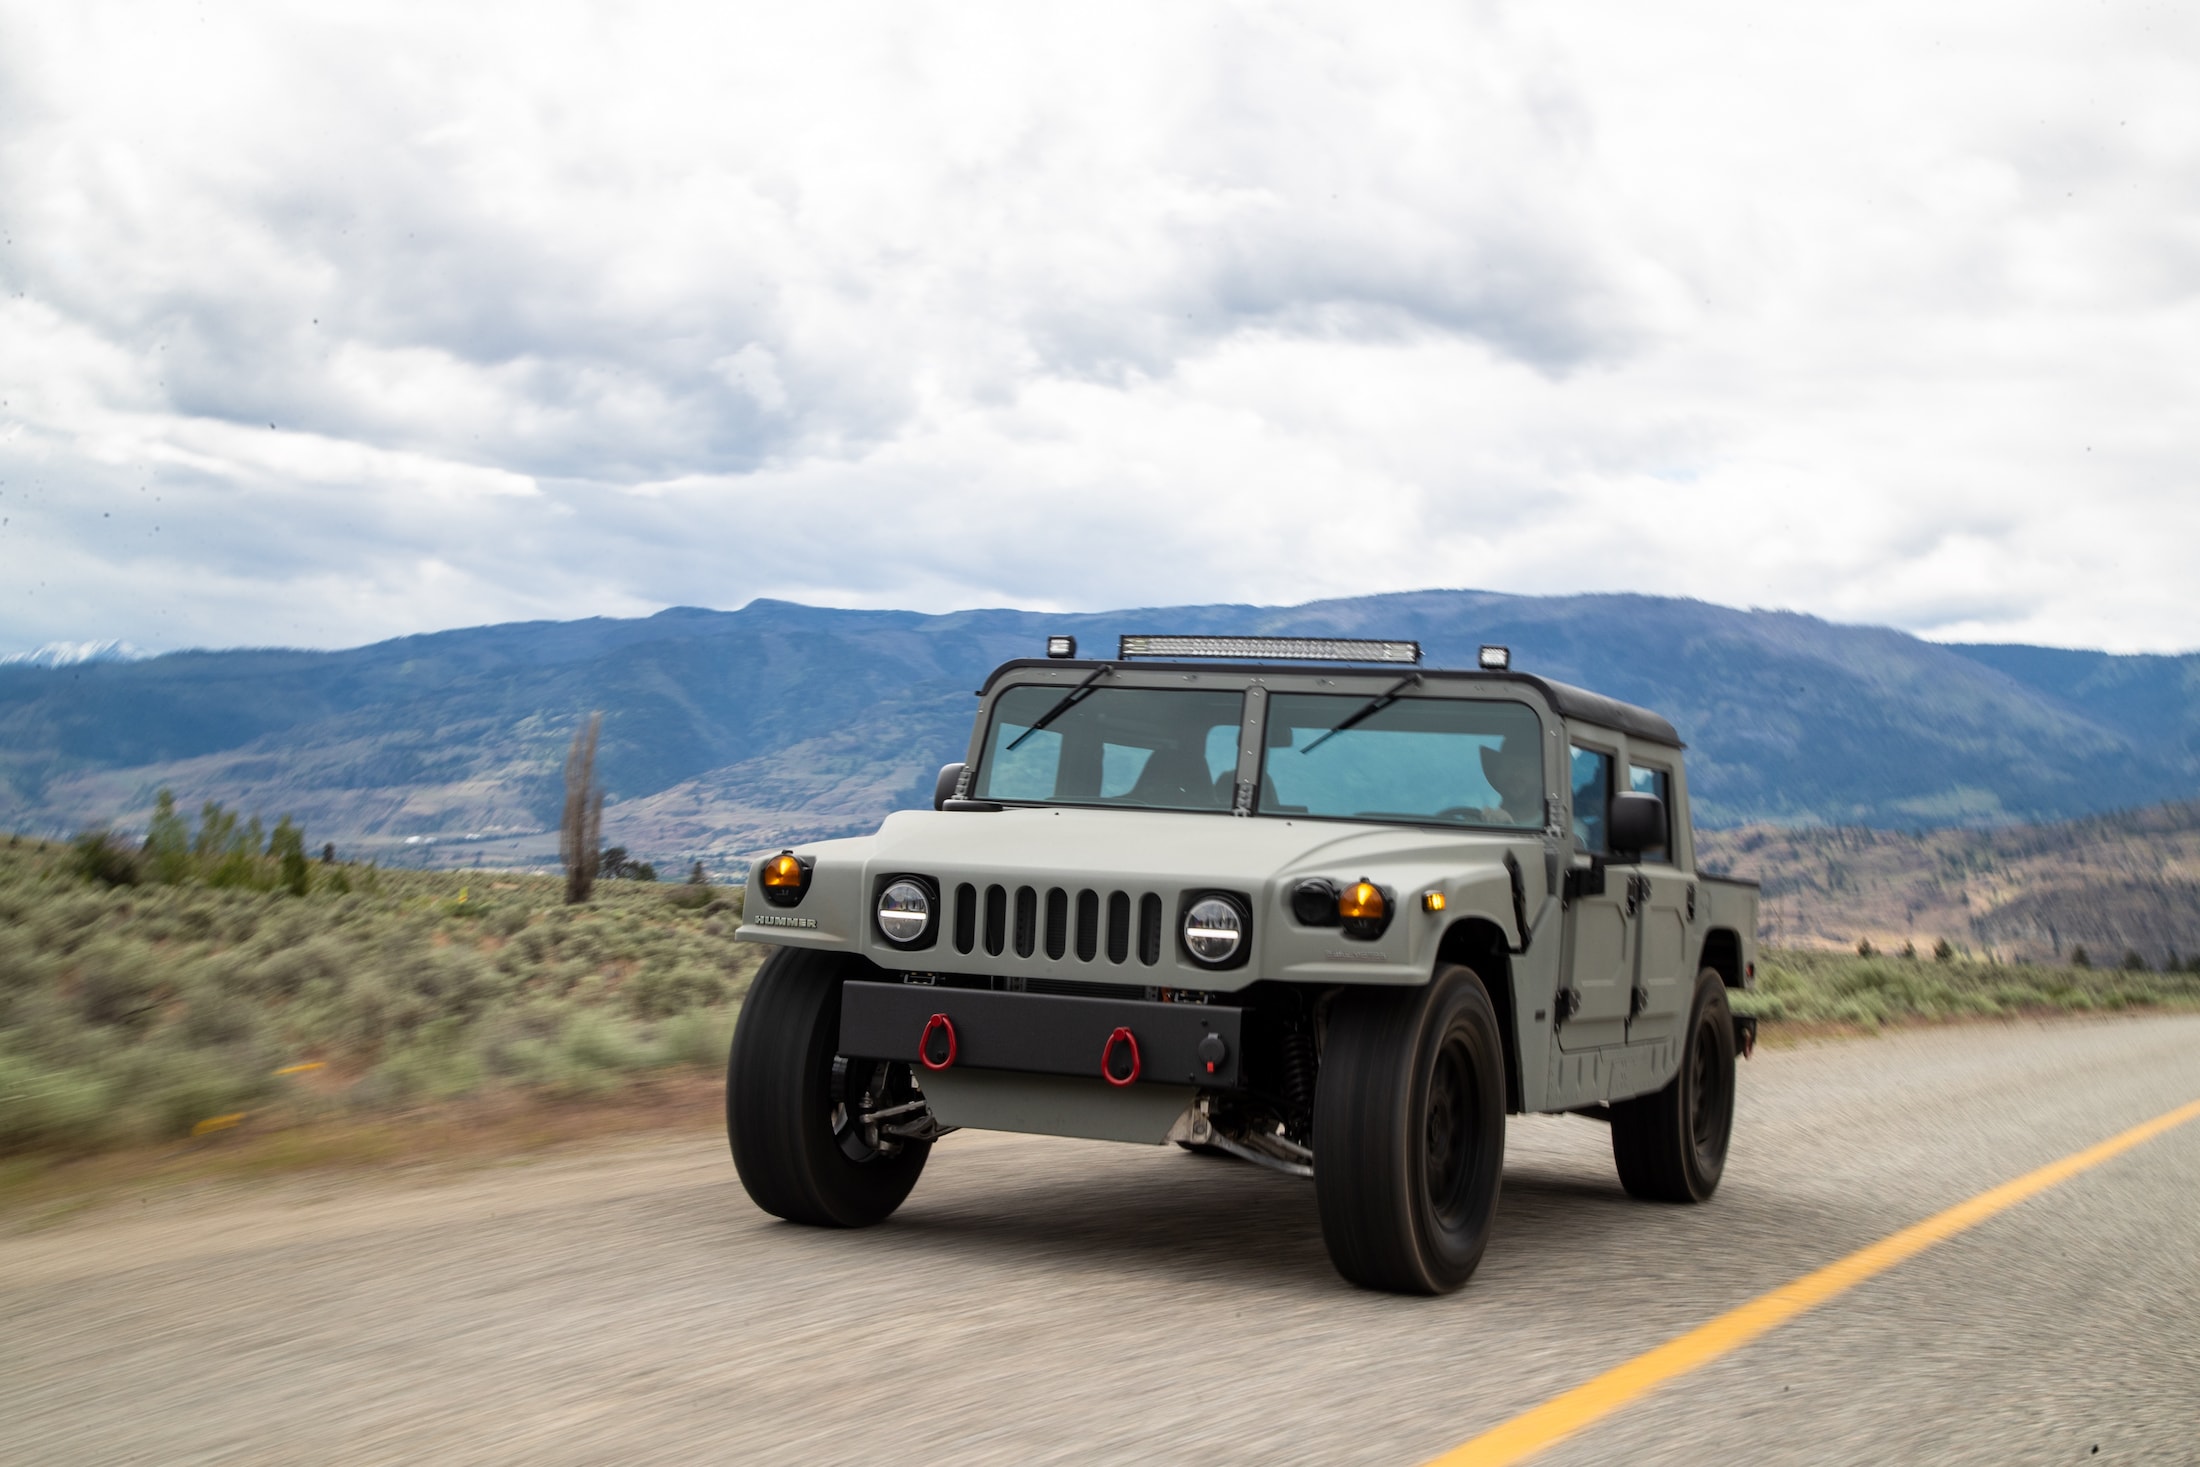 NAEV Introduces the 1,000 HP Eco-Friendly Cyber-Hummer